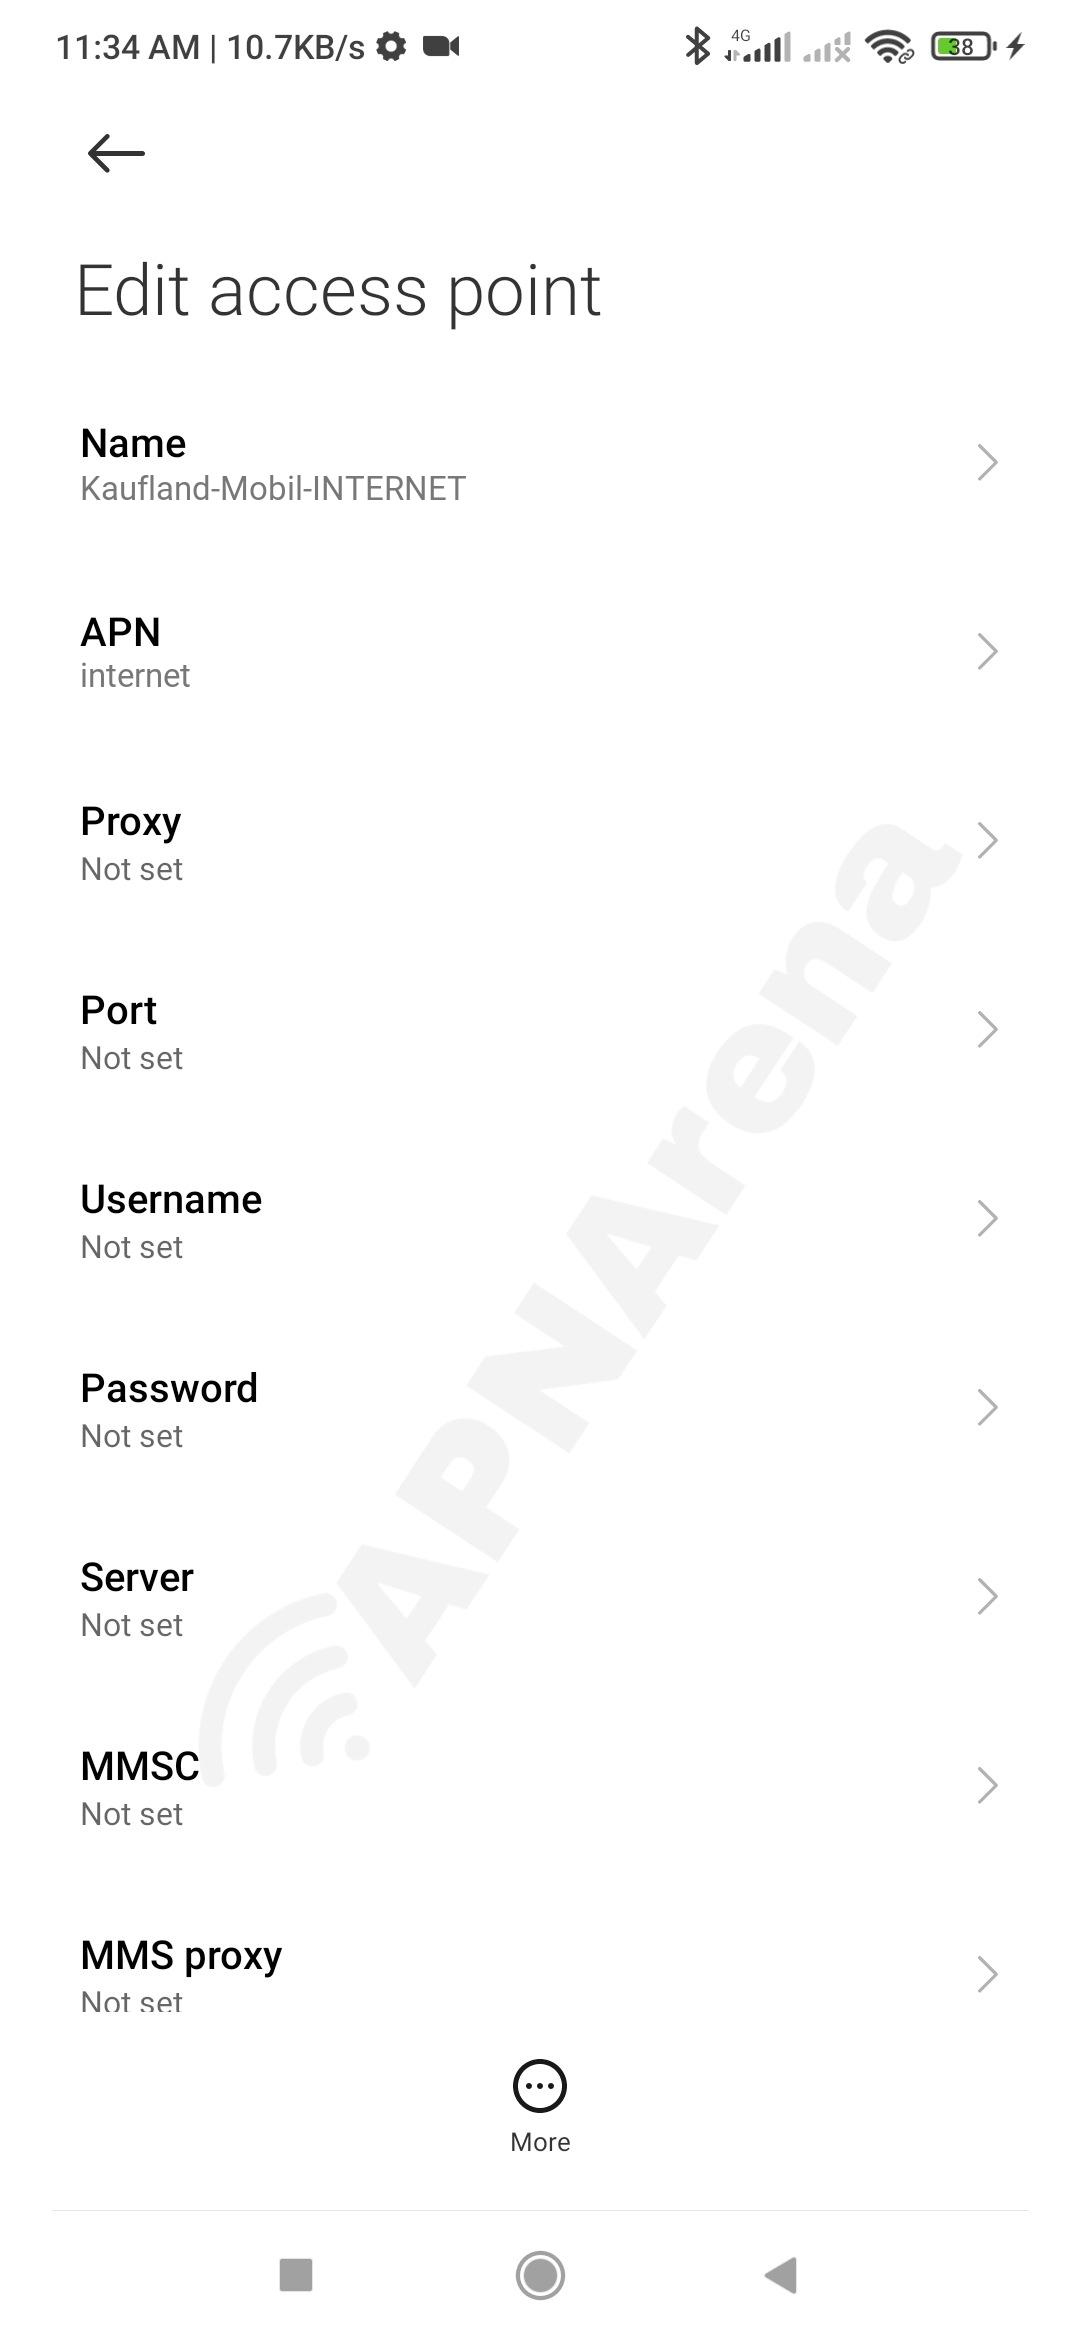 Kaufland mobil APN Settings for Android